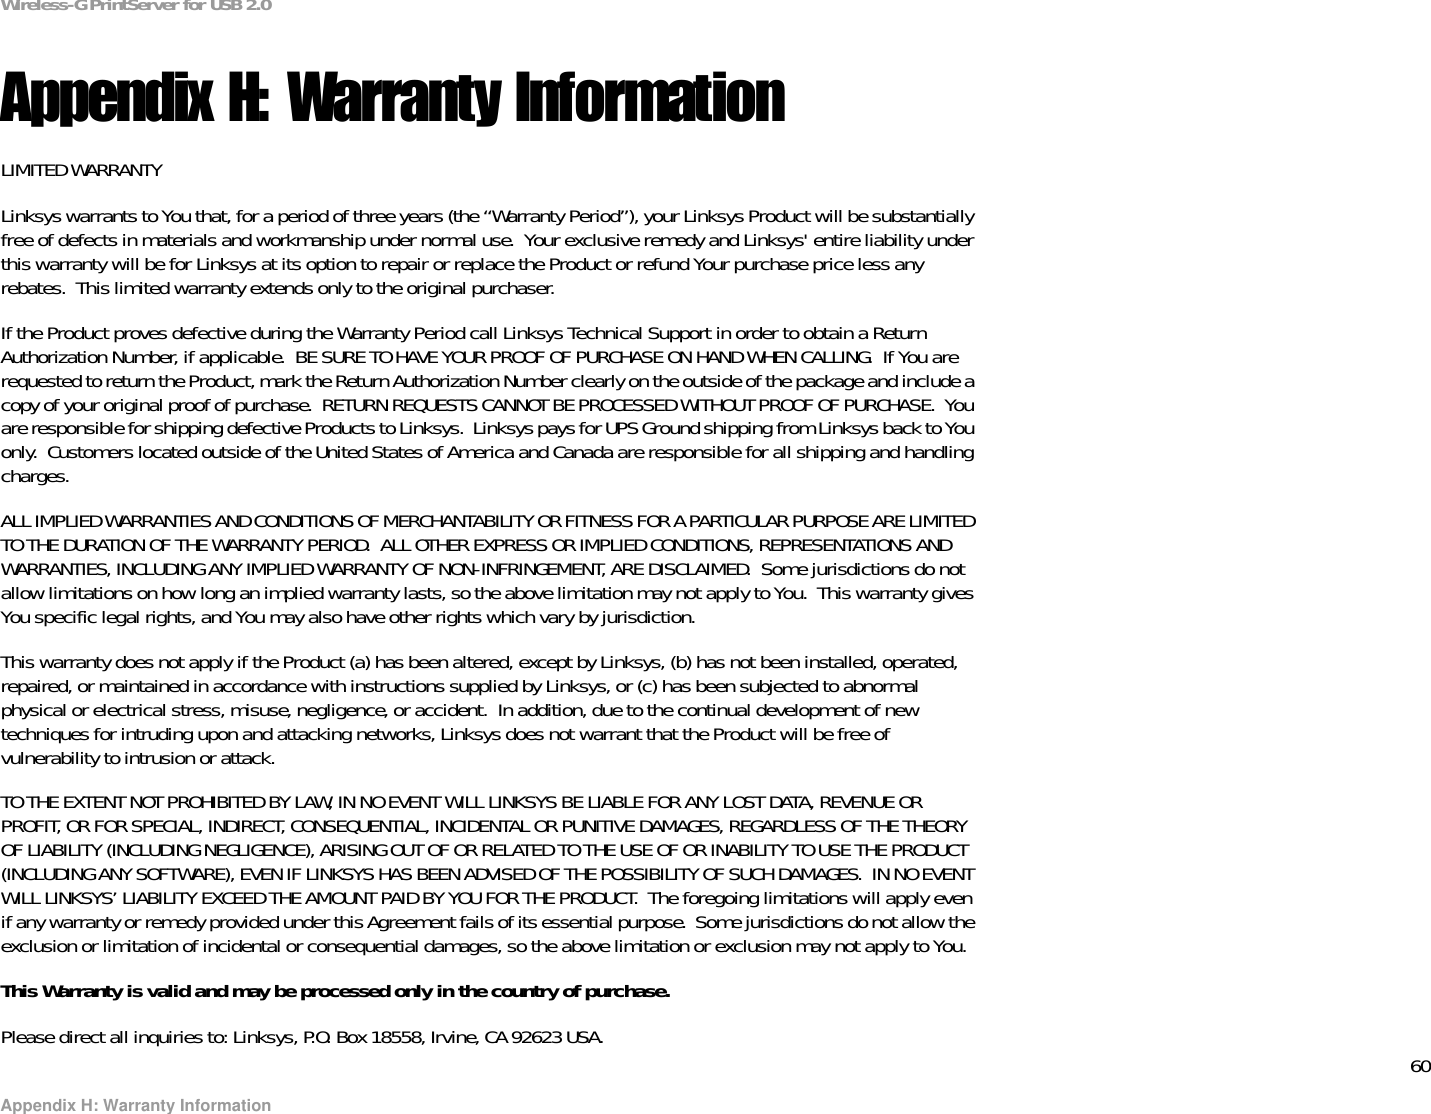 60Appendix H: Warranty InformationWireless-G PrintServer for USB 2.0Appendix H: Warranty InformationLIMITED WARRANTYLinksys warrants to You that, for a period of three years (the “Warranty Period”), your Linksys Product will be substantially free of defects in materials and workmanship under normal use.  Your exclusive remedy and Linksys&apos; entire liability under this warranty will be for Linksys at its option to repair or replace the Product or refund Your purchase price less any rebates.  This limited warranty extends only to the original purchaser.  If the Product proves defective during the Warranty Period call Linksys Technical Support in order to obtain a Return Authorization Number, if applicable.  BE SURE TO HAVE YOUR PROOF OF PURCHASE ON HAND WHEN CALLING.  If You are requested to return the Product, mark the Return Authorization Number clearly on the outside of the package and include a copy of your original proof of purchase.  RETURN REQUESTS CANNOT BE PROCESSED WITHOUT PROOF OF PURCHASE.  You are responsible for shipping defective Products to Linksys.  Linksys pays for UPS Ground shipping from Linksys back to You only.  Customers located outside of the United States of America and Canada are responsible for all shipping and handling charges. ALL IMPLIED WARRANTIES AND CONDITIONS OF MERCHANTABILITY OR FITNESS FOR A PARTICULAR PURPOSE ARE LIMITED TO THE DURATION OF THE WARRANTY PERIOD.  ALL OTHER EXPRESS OR IMPLIED CONDITIONS, REPRESENTATIONS AND WARRANTIES, INCLUDING ANY IMPLIED WARRANTY OF NON-INFRINGEMENT, ARE DISCLAIMED.  Some jurisdictions do not allow limitations on how long an implied warranty lasts, so the above limitation may not apply to You.  This warranty gives You specific legal rights, and You may also have other rights which vary by jurisdiction.This warranty does not apply if the Product (a) has been altered, except by Linksys, (b) has not been installed, operated, repaired, or maintained in accordance with instructions supplied by Linksys, or (c) has been subjected to abnormal physical or electrical stress, misuse, negligence, or accident.  In addition, due to the continual development of new techniques for intruding upon and attacking networks, Linksys does not warrant that the Product will be free of vulnerability to intrusion or attack.TO THE EXTENT NOT PROHIBITED BY LAW, IN NO EVENT WILL LINKSYS BE LIABLE FOR ANY LOST DATA, REVENUE OR PROFIT, OR FOR SPECIAL, INDIRECT, CONSEQUENTIAL, INCIDENTAL OR PUNITIVE DAMAGES, REGARDLESS OF THE THEORY OF LIABILITY (INCLUDING NEGLIGENCE), ARISING OUT OF OR RELATED TO THE USE OF OR INABILITY TO USE THE PRODUCT (INCLUDING ANY SOFTWARE), EVEN IF LINKSYS HAS BEEN ADVISED OF THE POSSIBILITY OF SUCH DAMAGES.  IN NO EVENT WILL LINKSYS’ LIABILITY EXCEED THE AMOUNT PAID BY YOU FOR THE PRODUCT.  The foregoing limitations will apply even if any warranty or remedy provided under this Agreement fails of its essential purpose.  Some jurisdictions do not allow the exclusion or limitation of incidental or consequential damages, so the above limitation or exclusion may not apply to You.This Warranty is valid and may be processed only in the country of purchase.Please direct all inquiries to: Linksys, P.O. Box 18558, Irvine, CA 92623 USA.